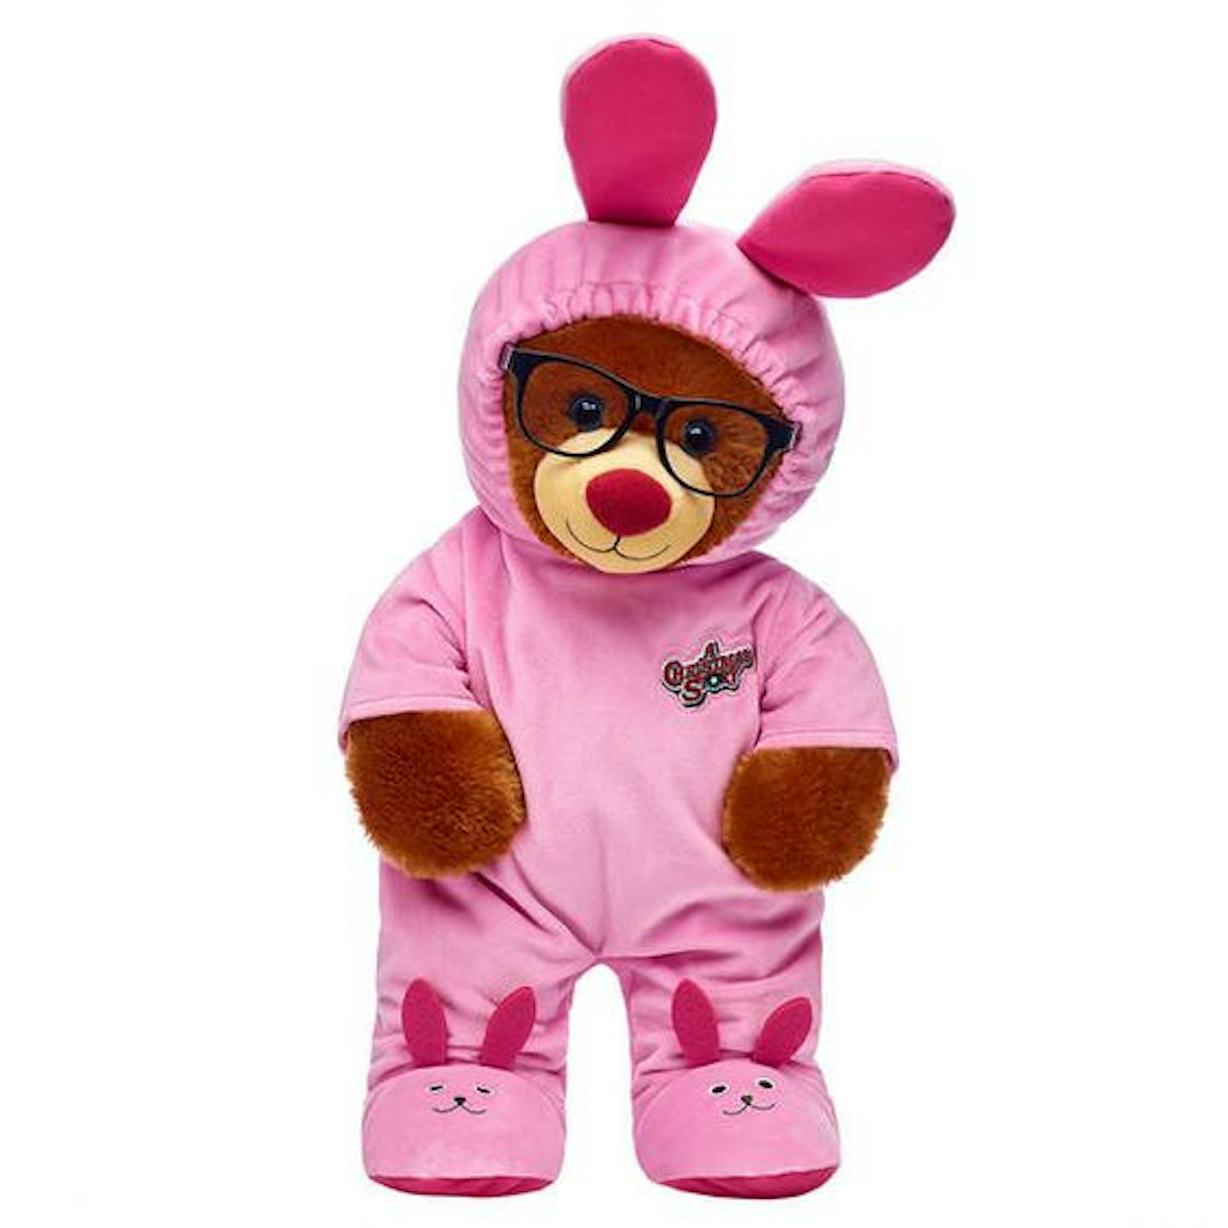 'A Christmas Story' Build-A-Bear Is Here To Make Your Holiday Hilarious